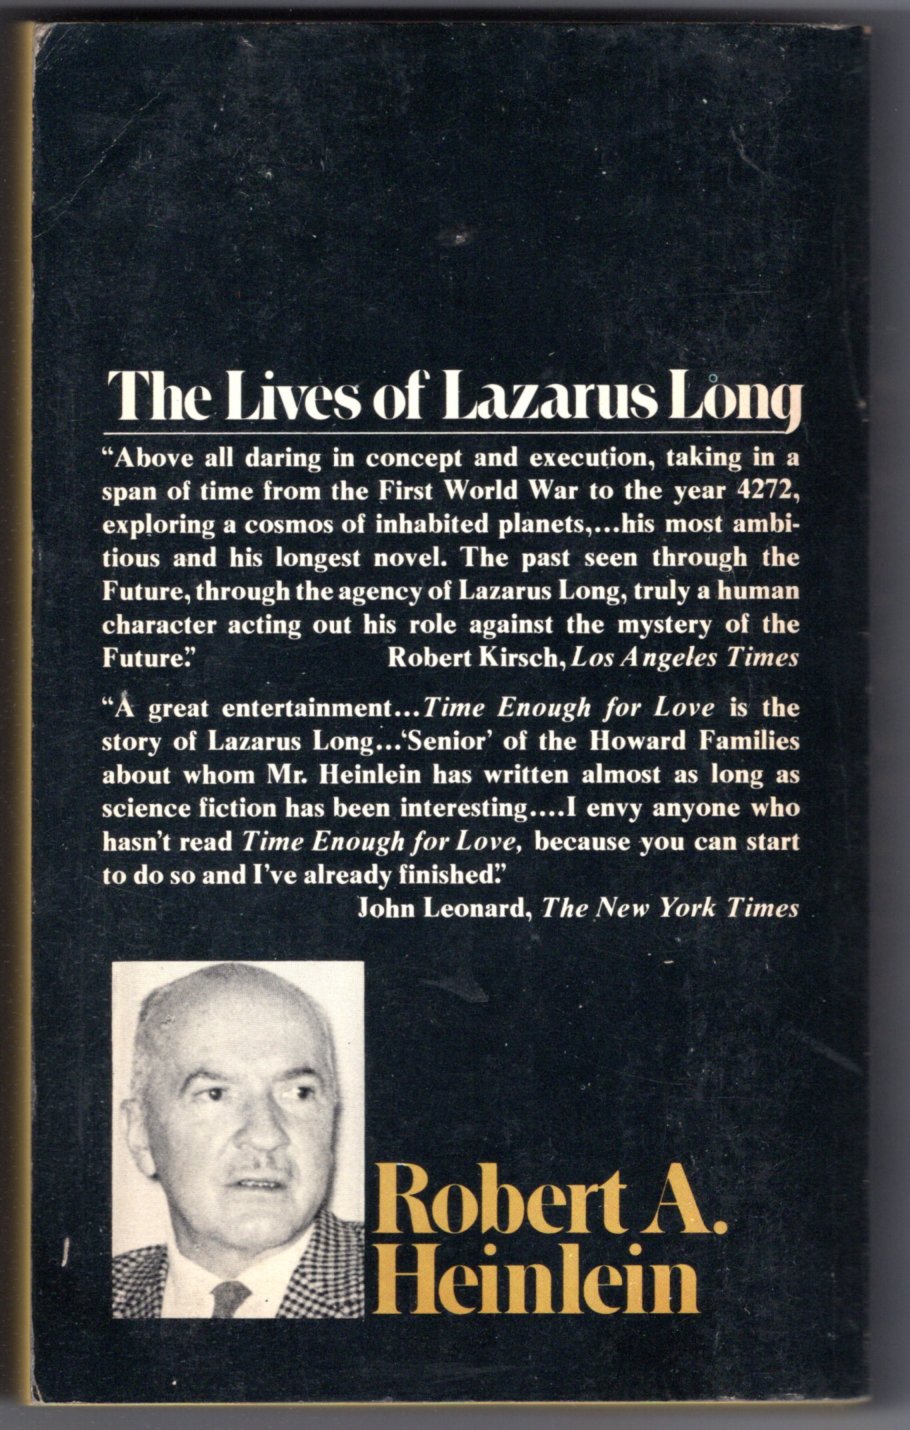 Time Enough for Love - The Lives of Lazarus Long by Heinlein, Robert A.: Very Good Plus cover (1974) First Edition | Mirror Image